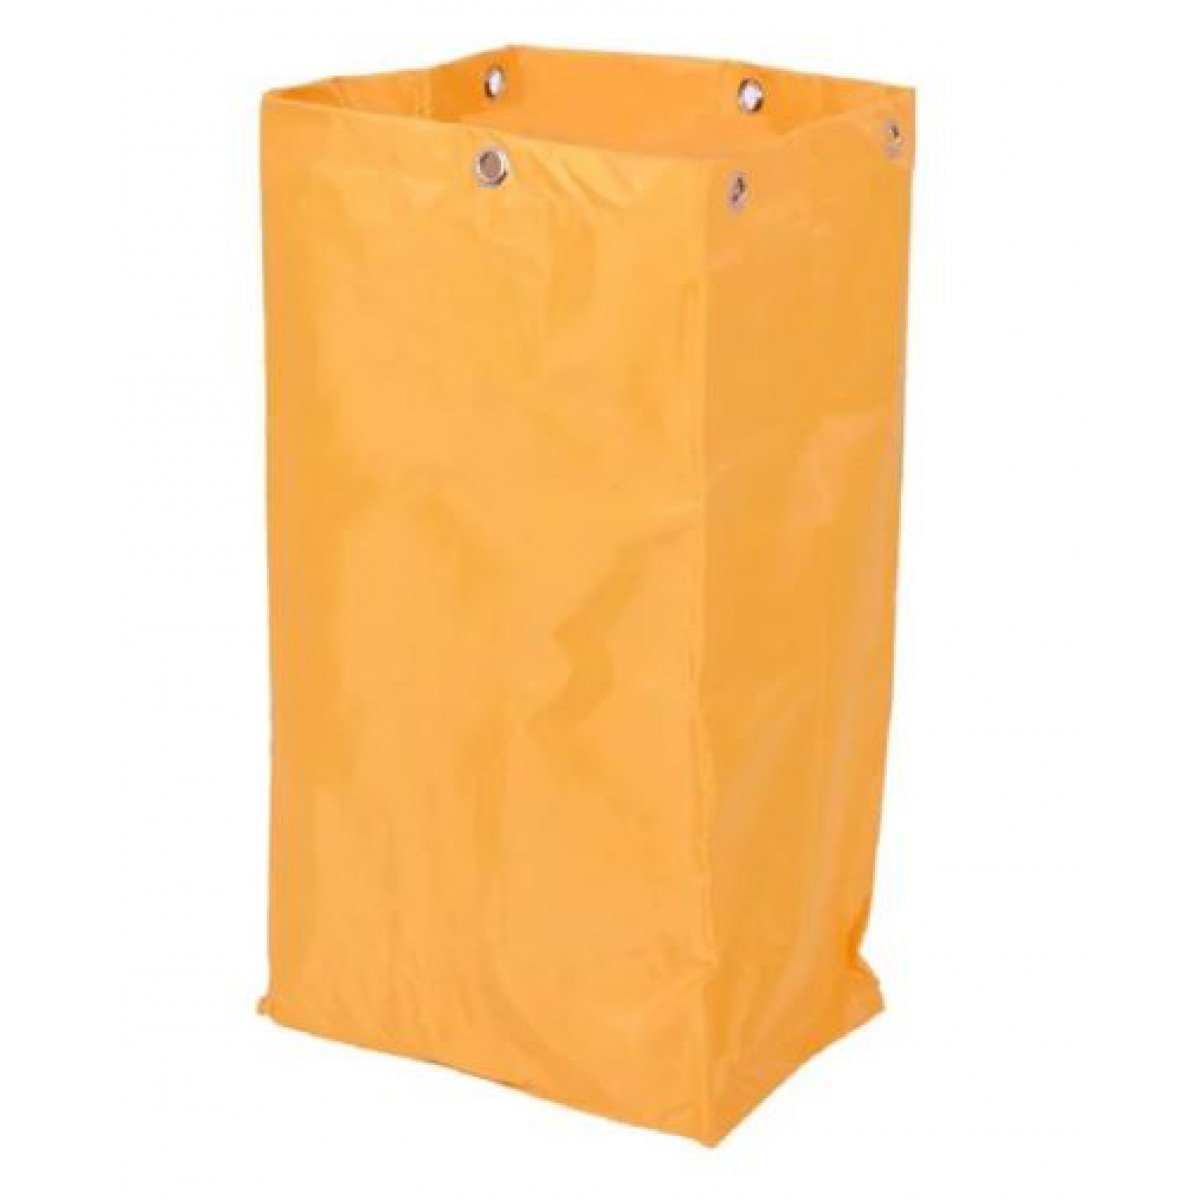 Jantex spare bag for housekeeping trolley